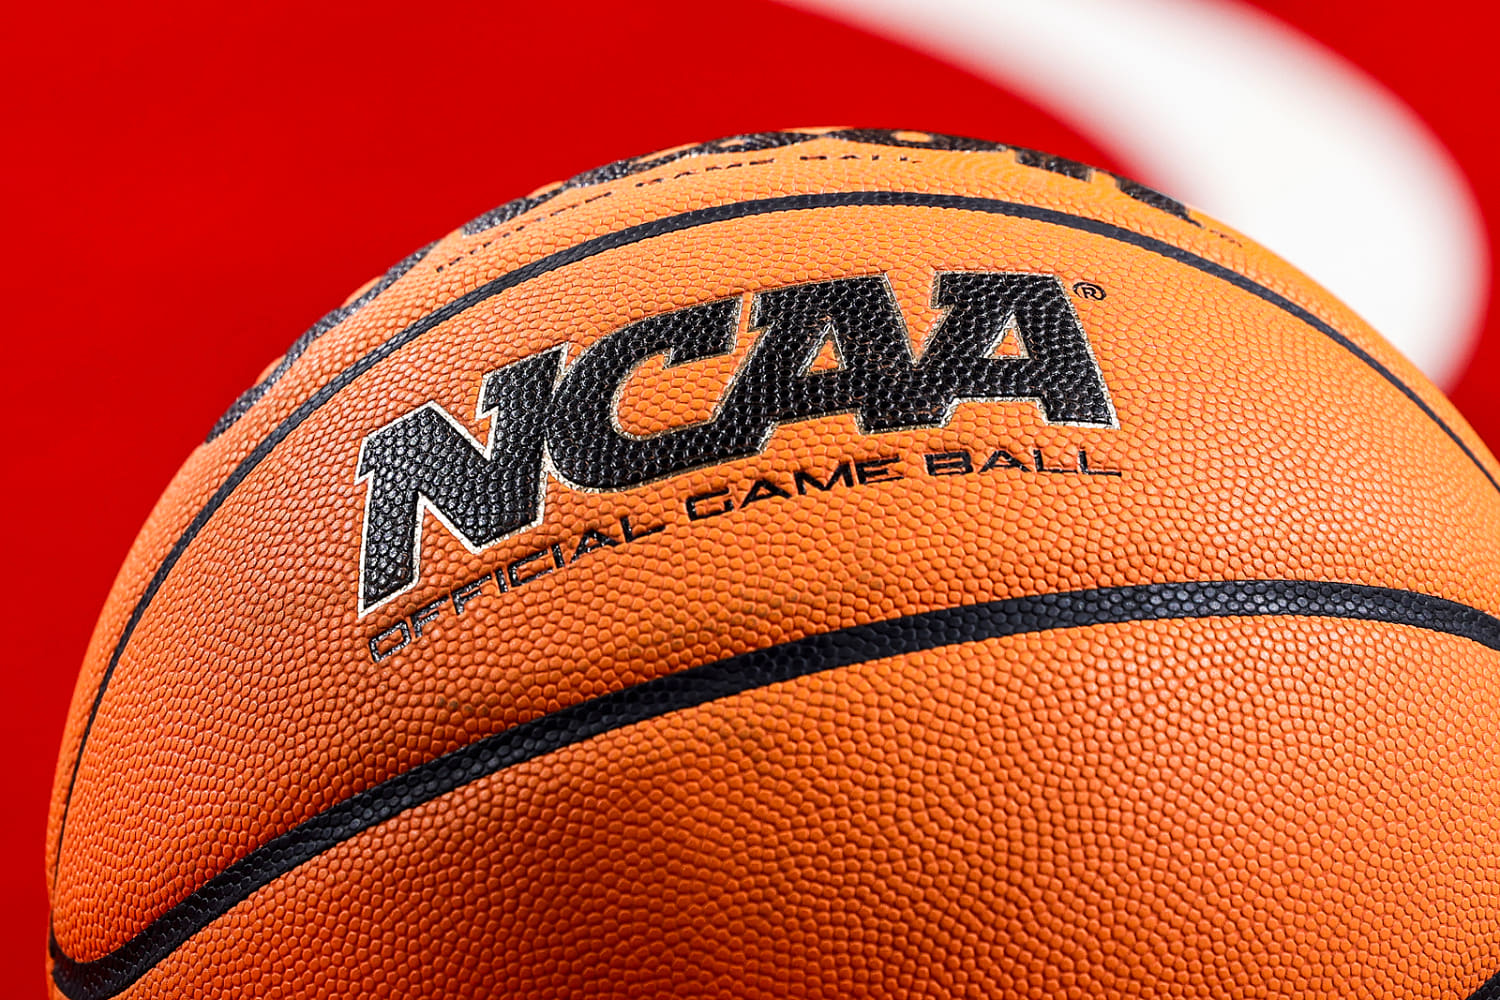 March Madness season kicks off with Selection Sunday